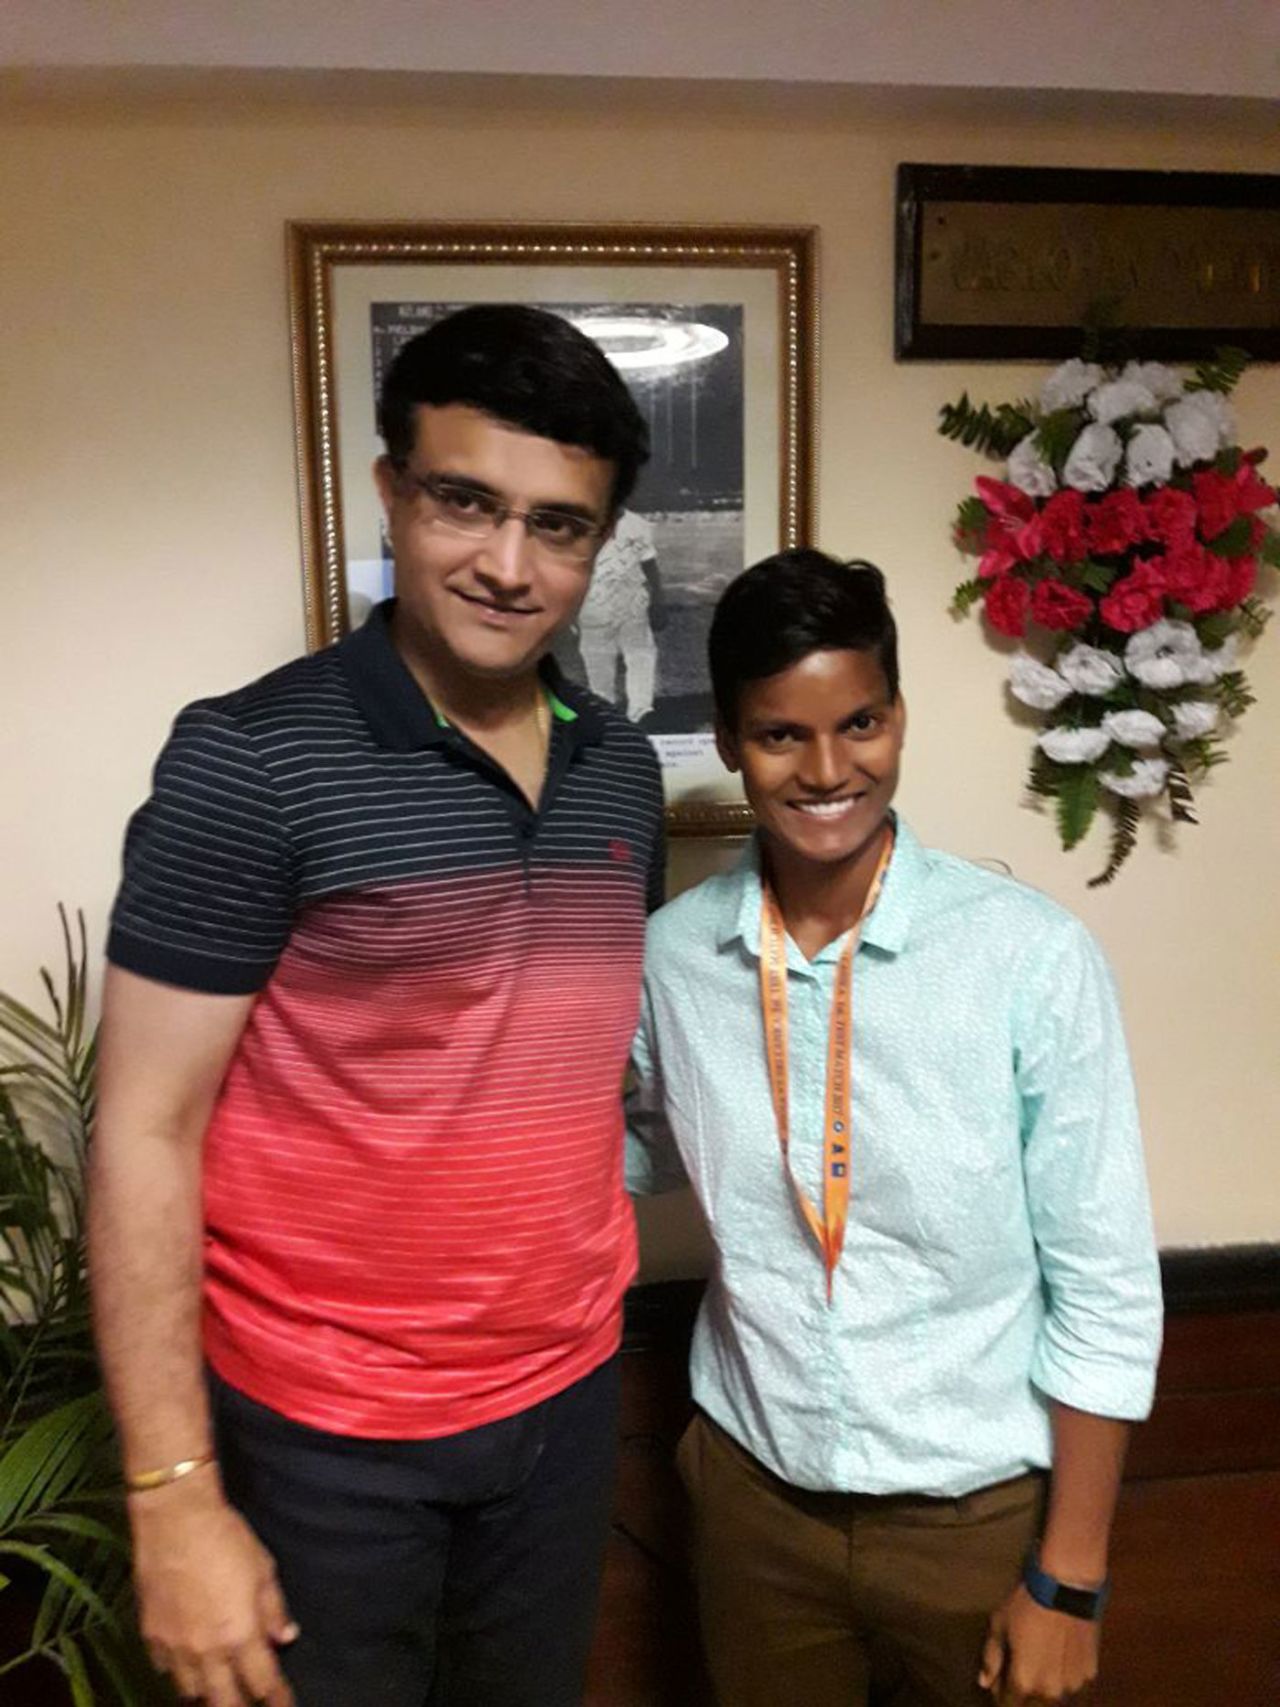 Sourav Ganguly welcomes Deepti Sharma to the Bengal women's side after her transfer in the domestic circuit, November 19, 2017